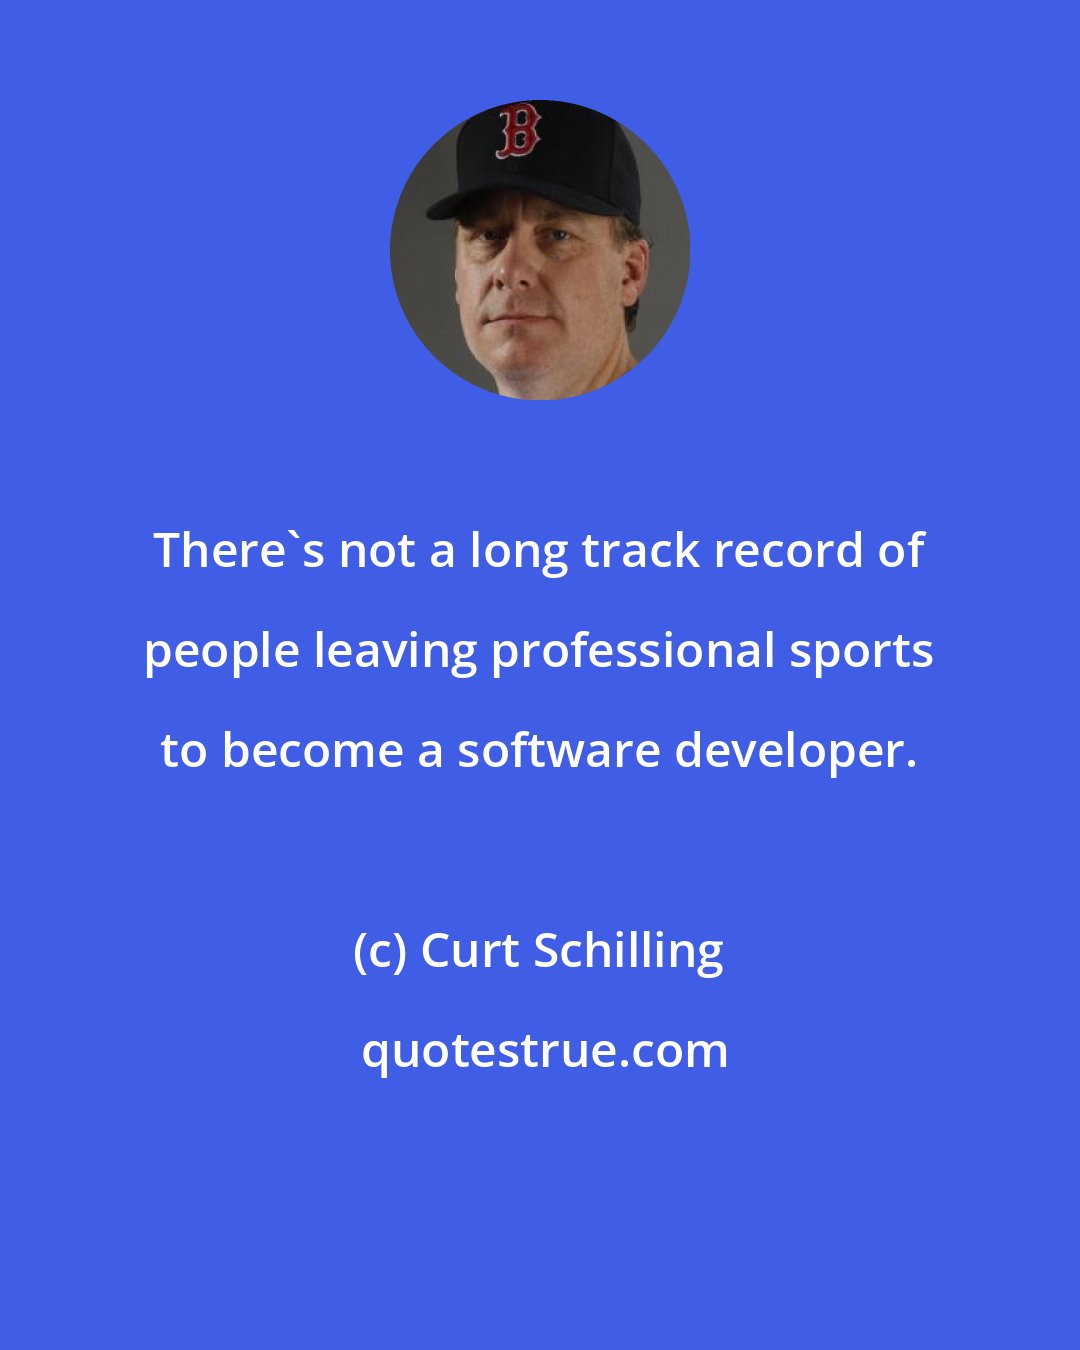 Curt Schilling: There's not a long track record of people leaving professional sports to become a software developer.